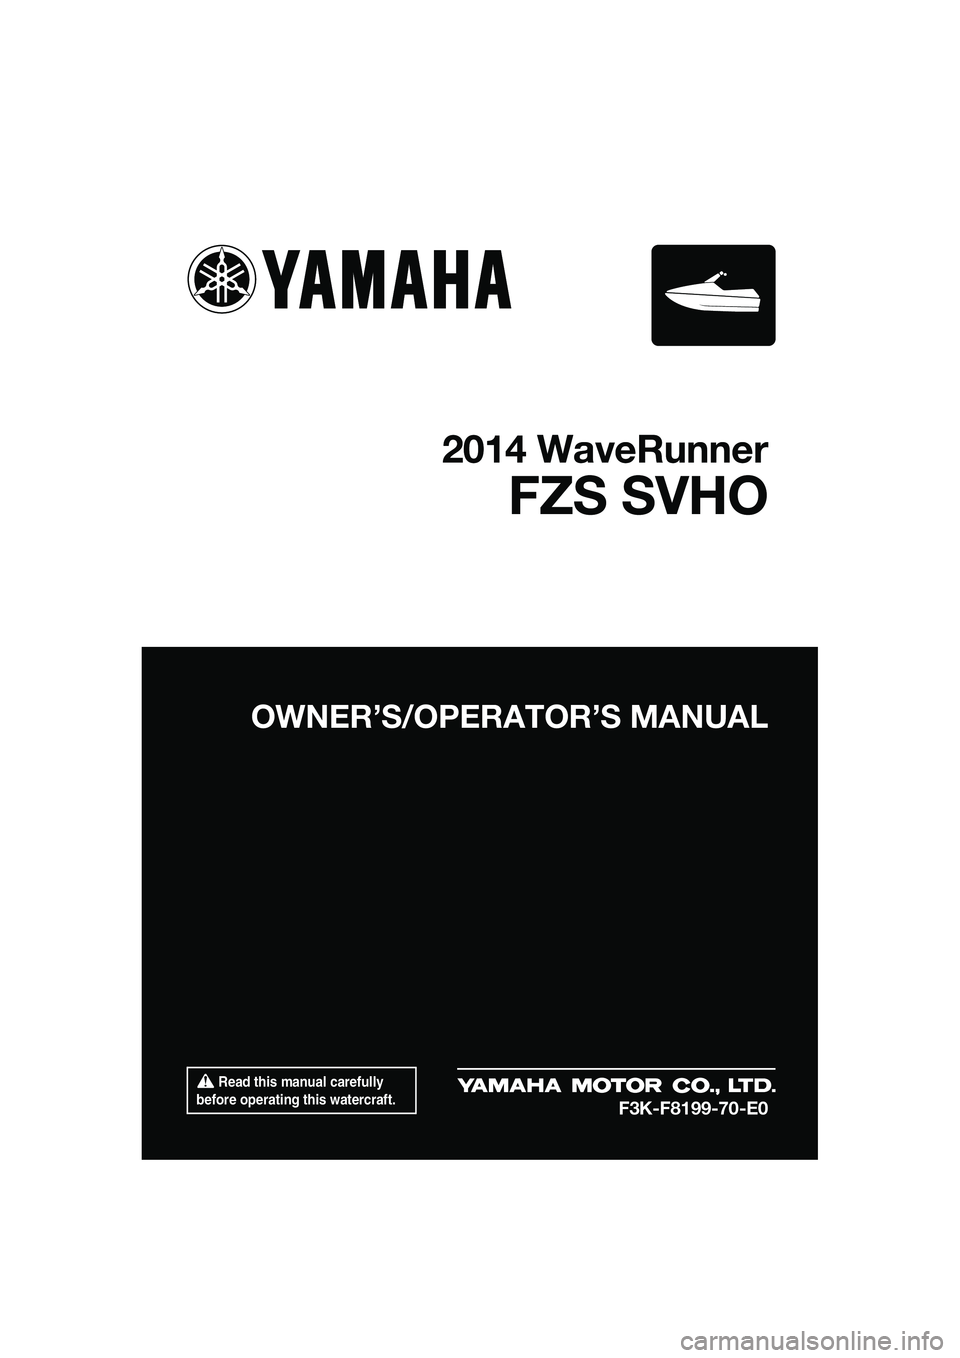 YAMAHA FZS SVHO 2014  Owners Manual  Read this manual carefully 
before operating this watercraft.
OWNER’S/OPERAT OR’S MANUAL
2014 WaveRunner
FZS SVHO
F3K-F8199-70-E0
UF3K70E0.book  Page 1  Tuesday, November 5, 2013  8:44 AM 